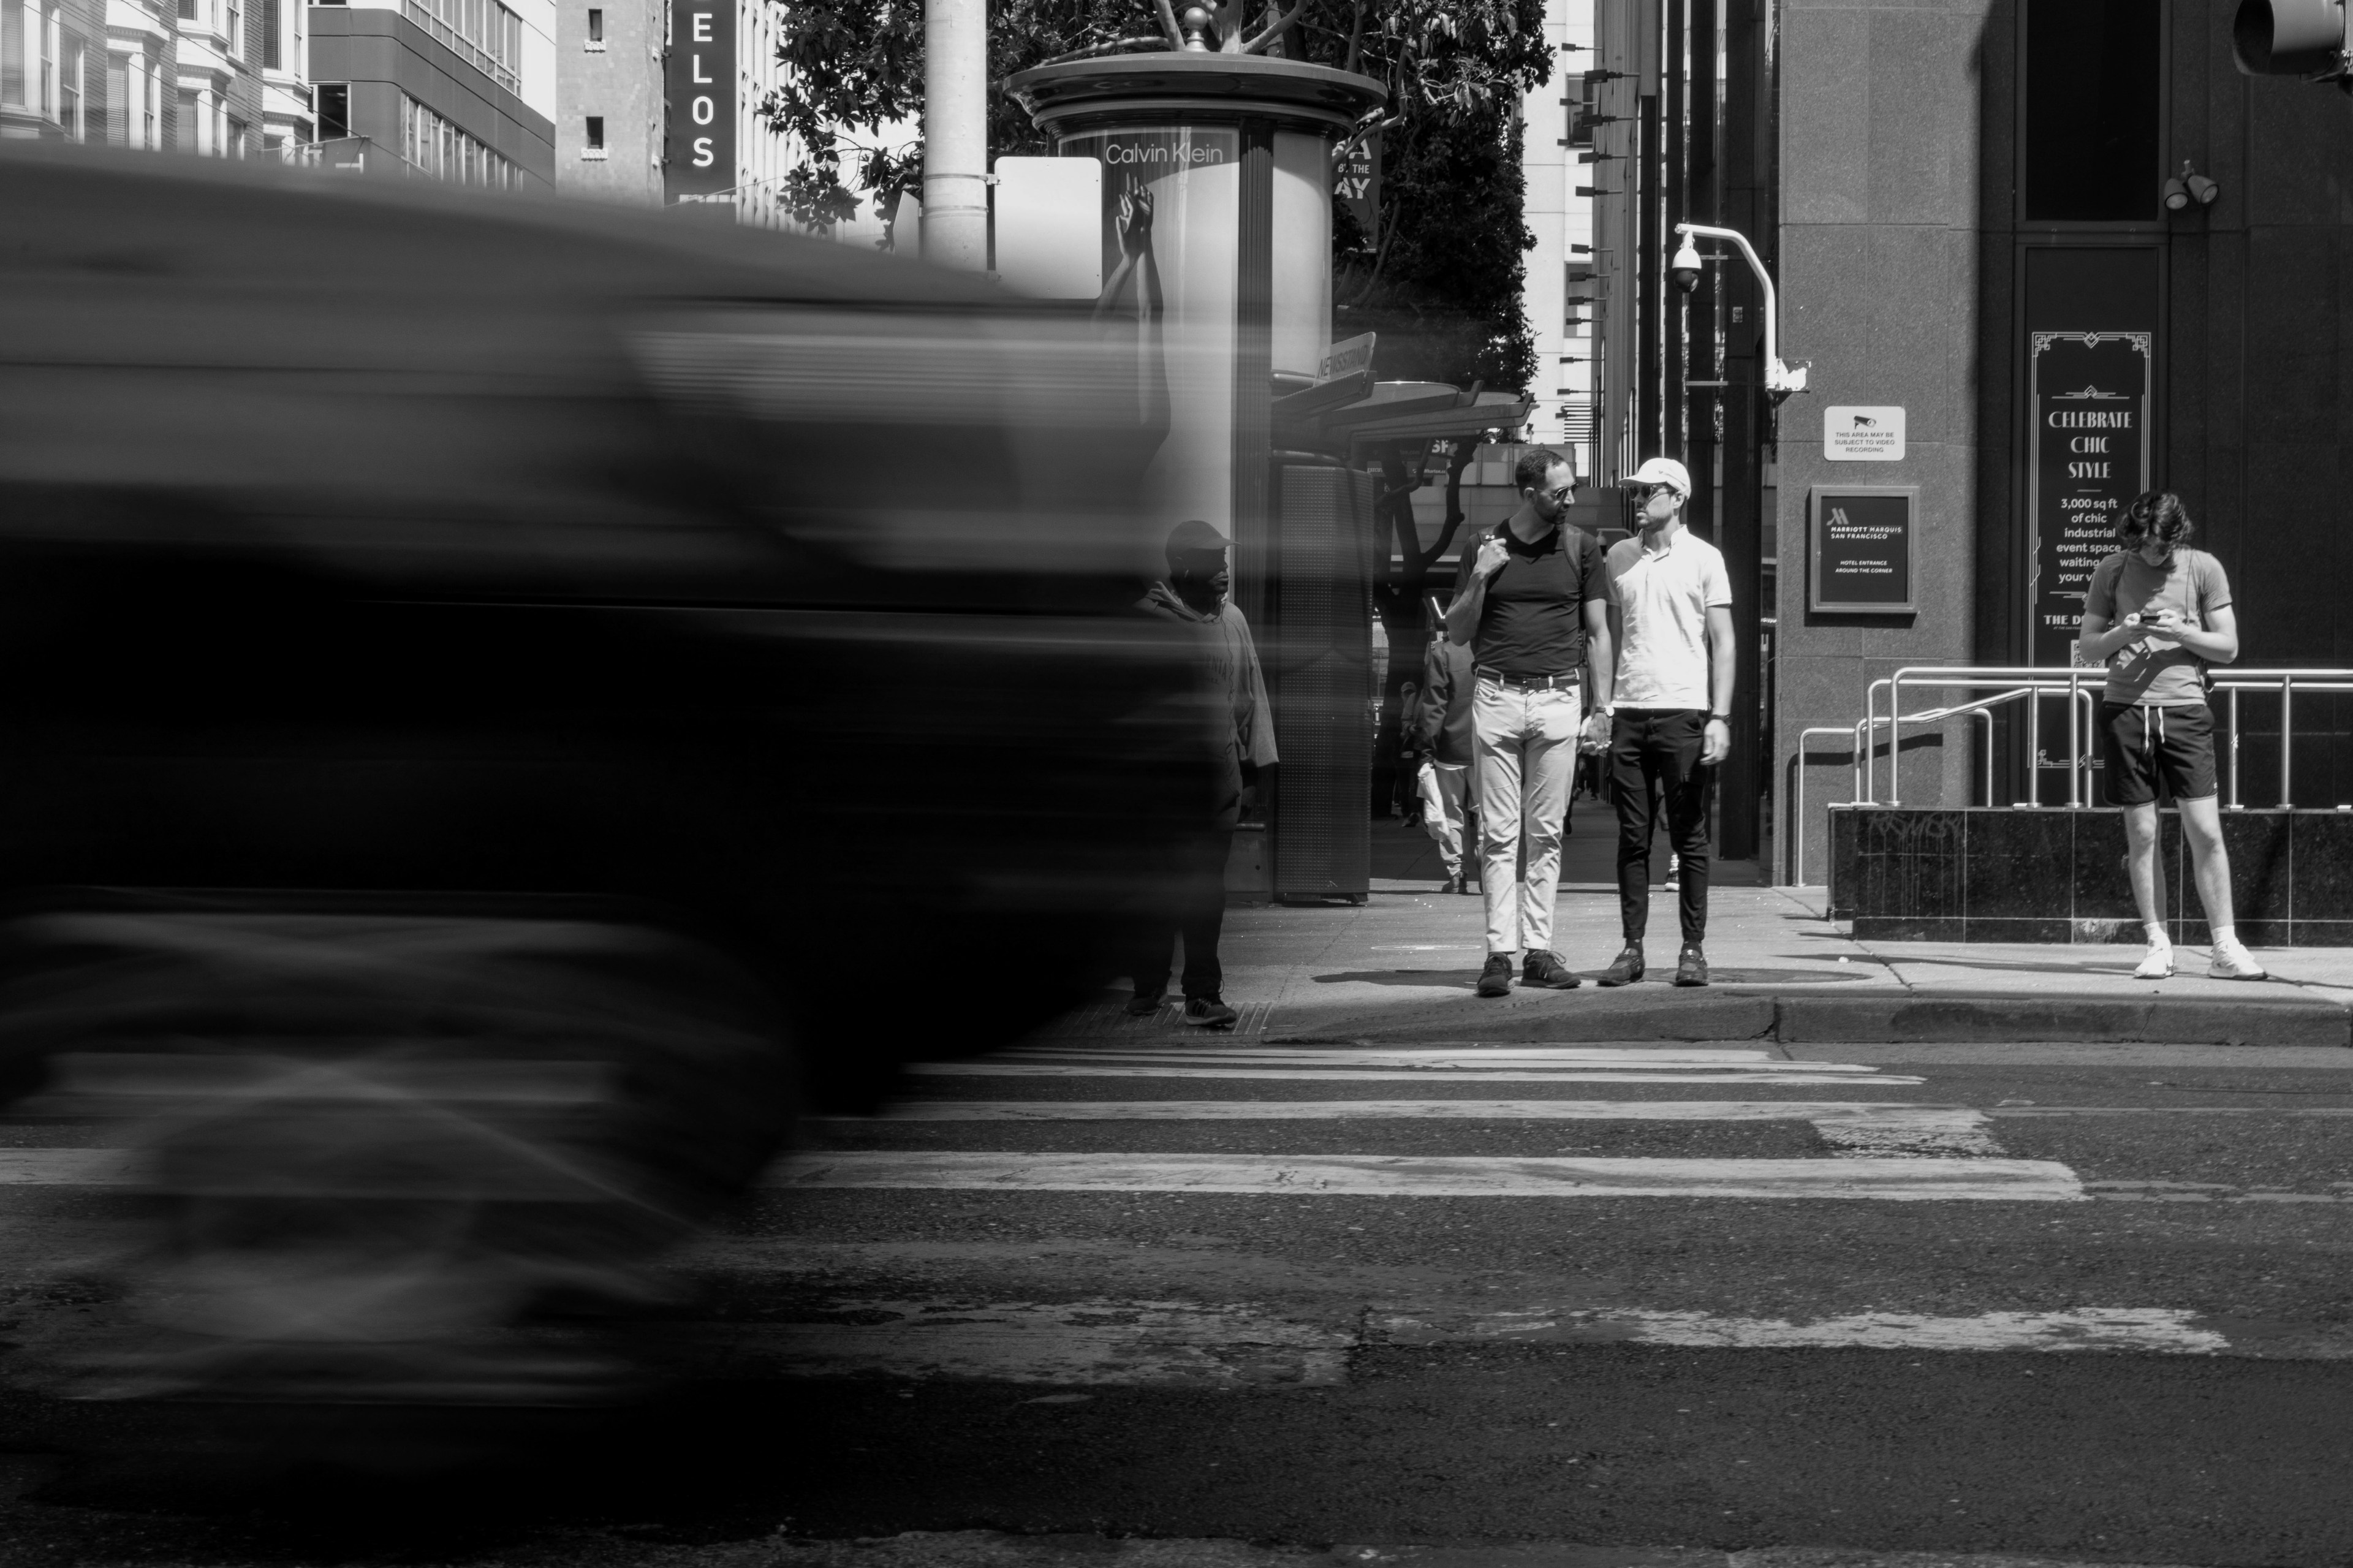 In a city street scene, several people wait to cross while a blurred vehicle speeds past in the foreground, creating a dynamic contrast between motion and stillness.